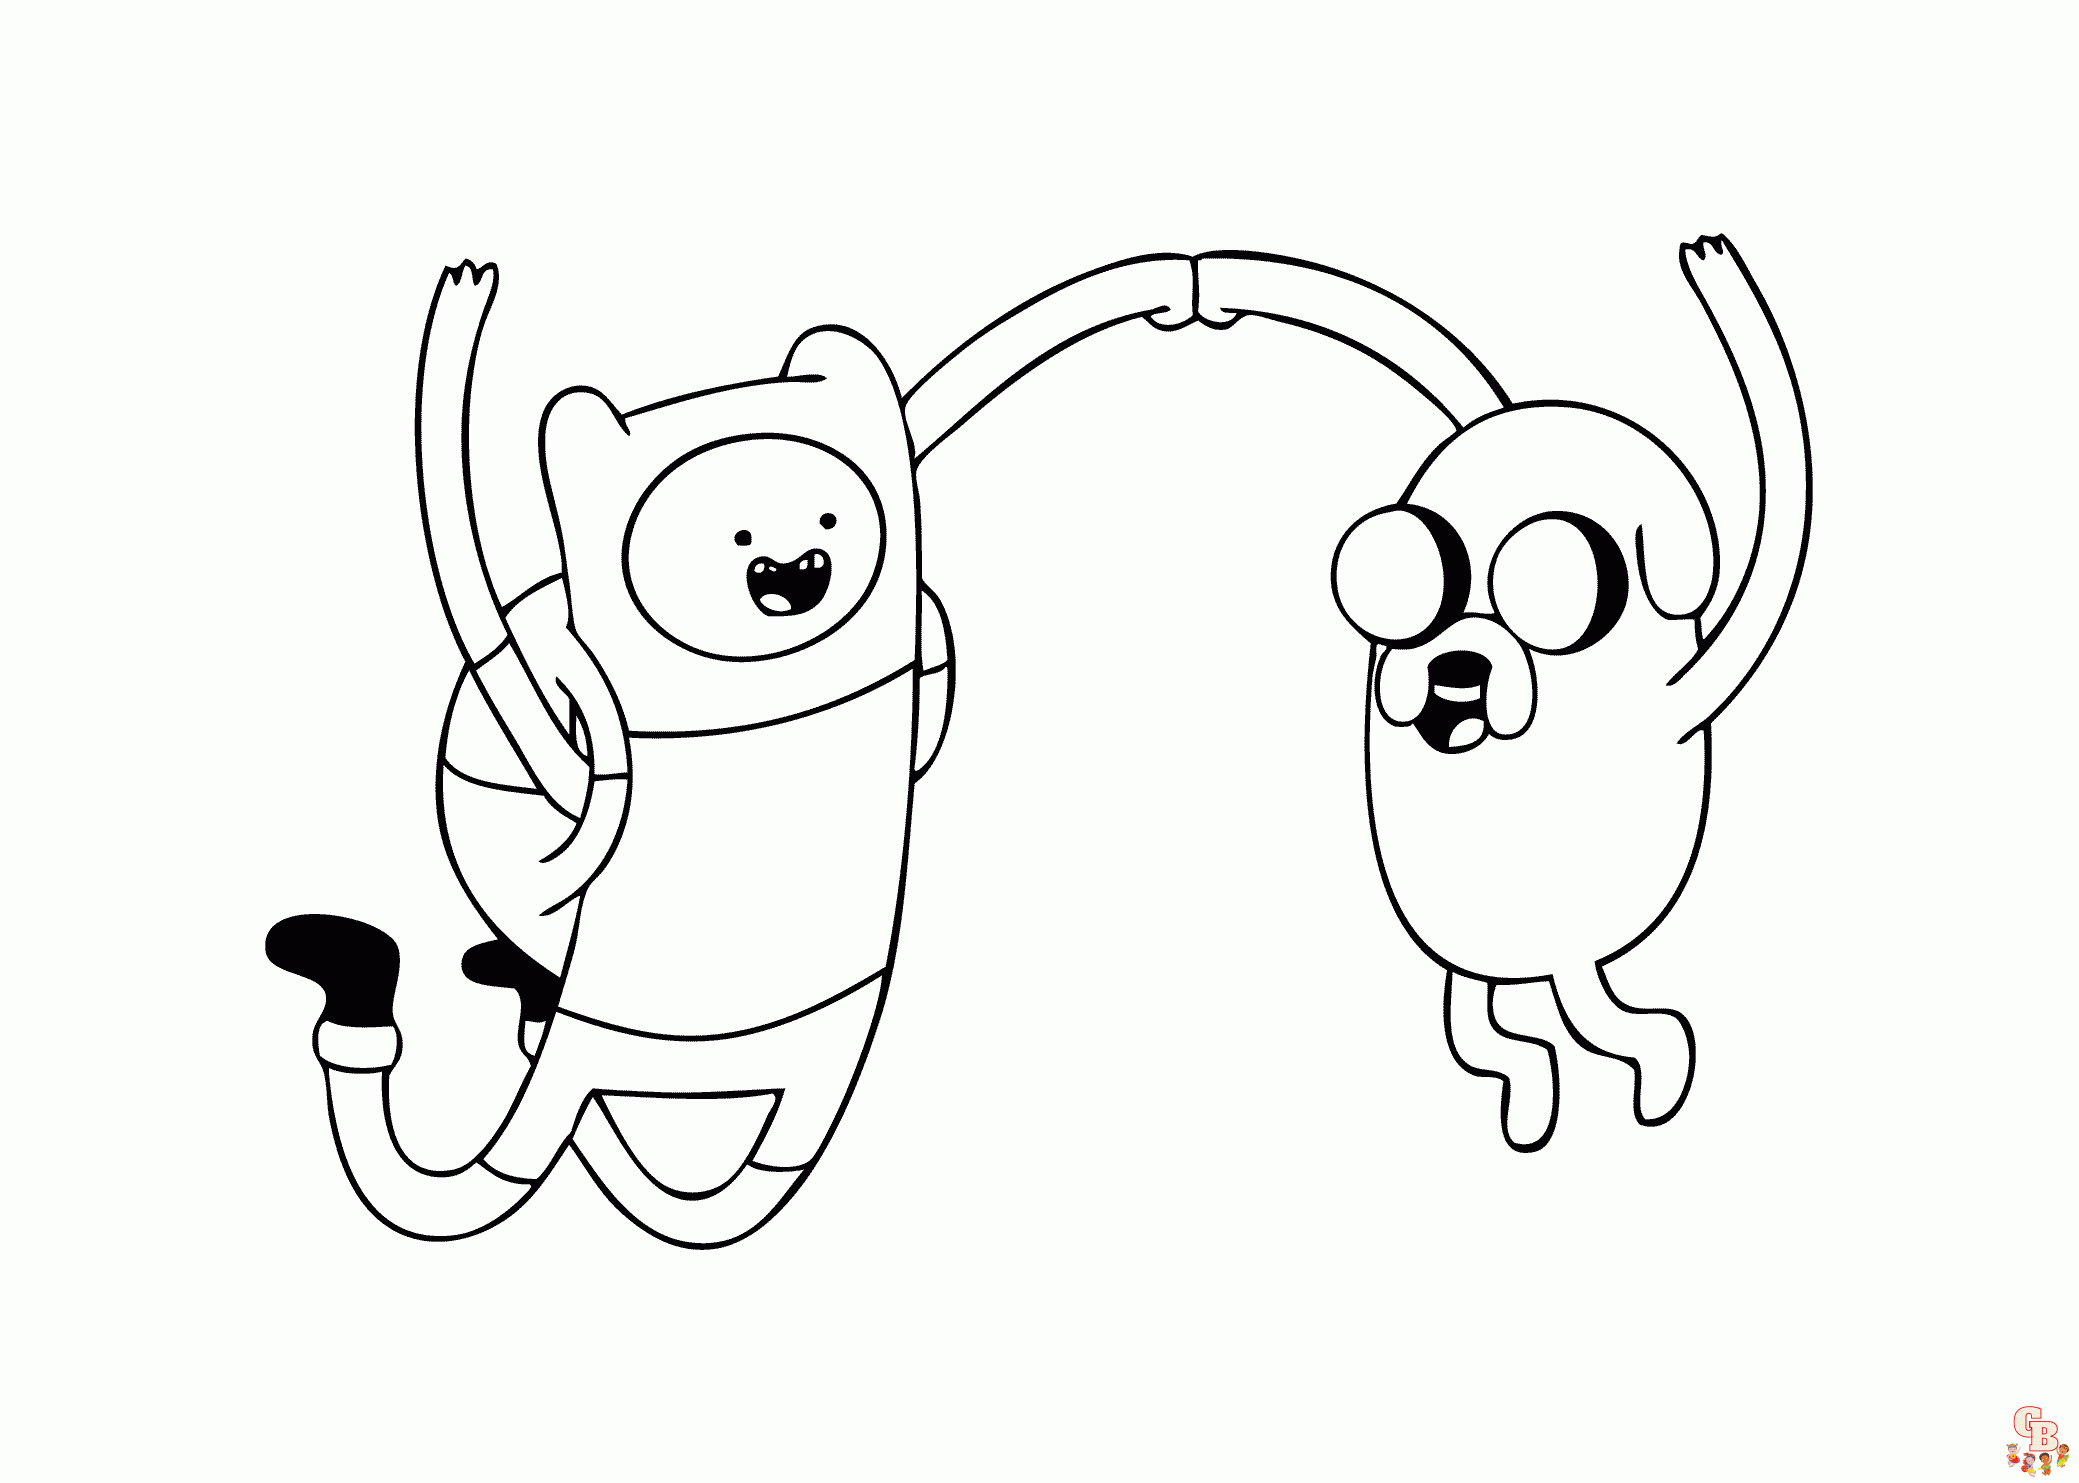 Finn and Jake Coloring Pages 2